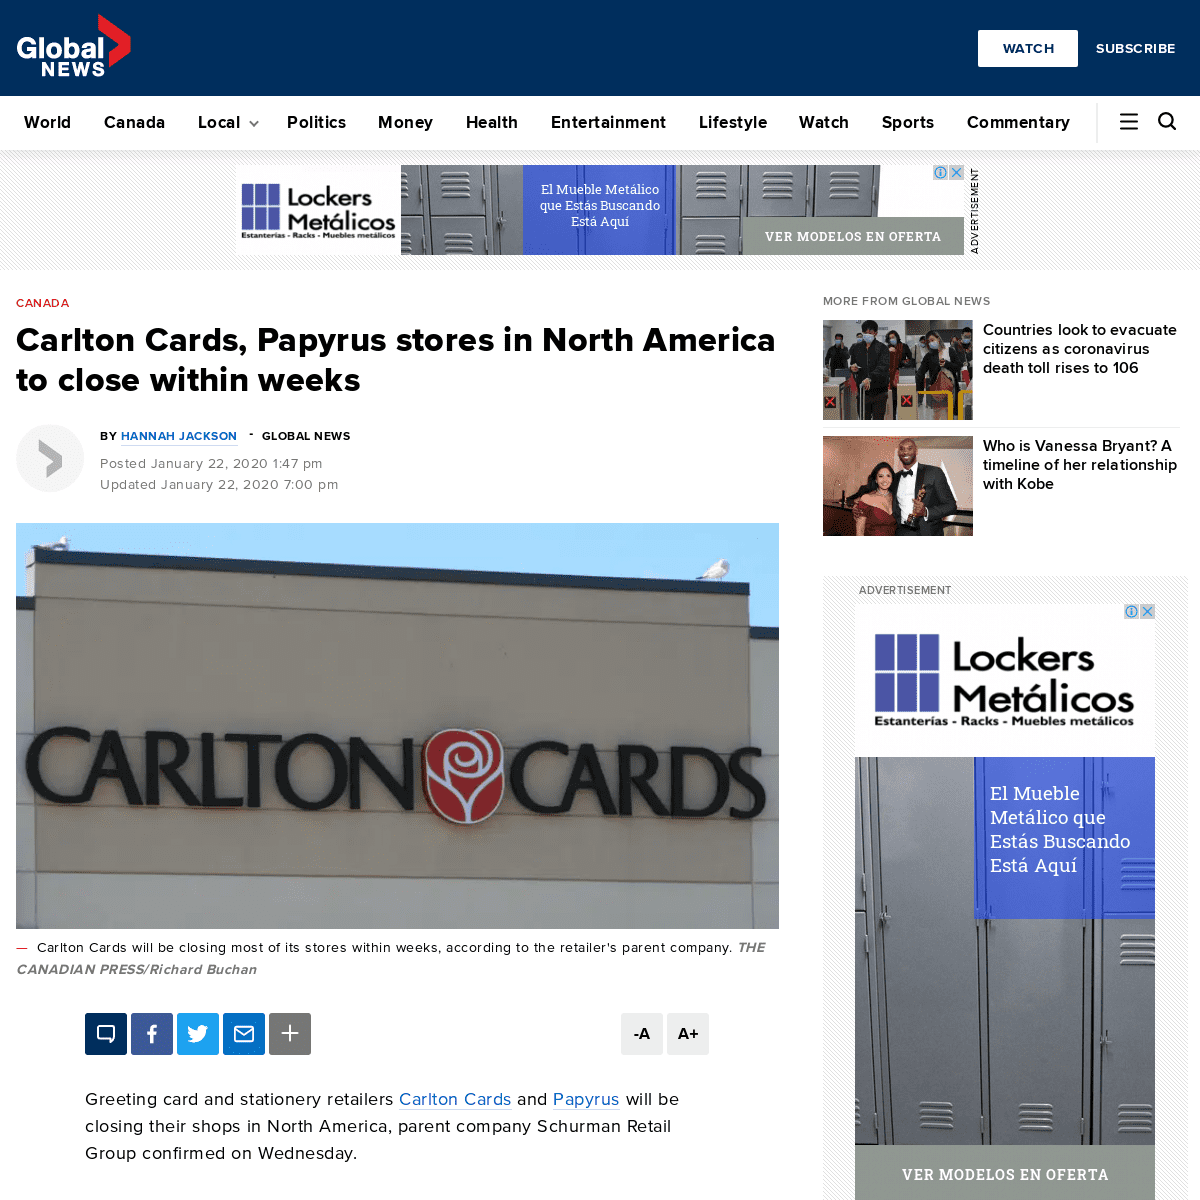 A complete backup of globalnews.ca/news/6446930/carlton-cards-papyrus-stores-closing/